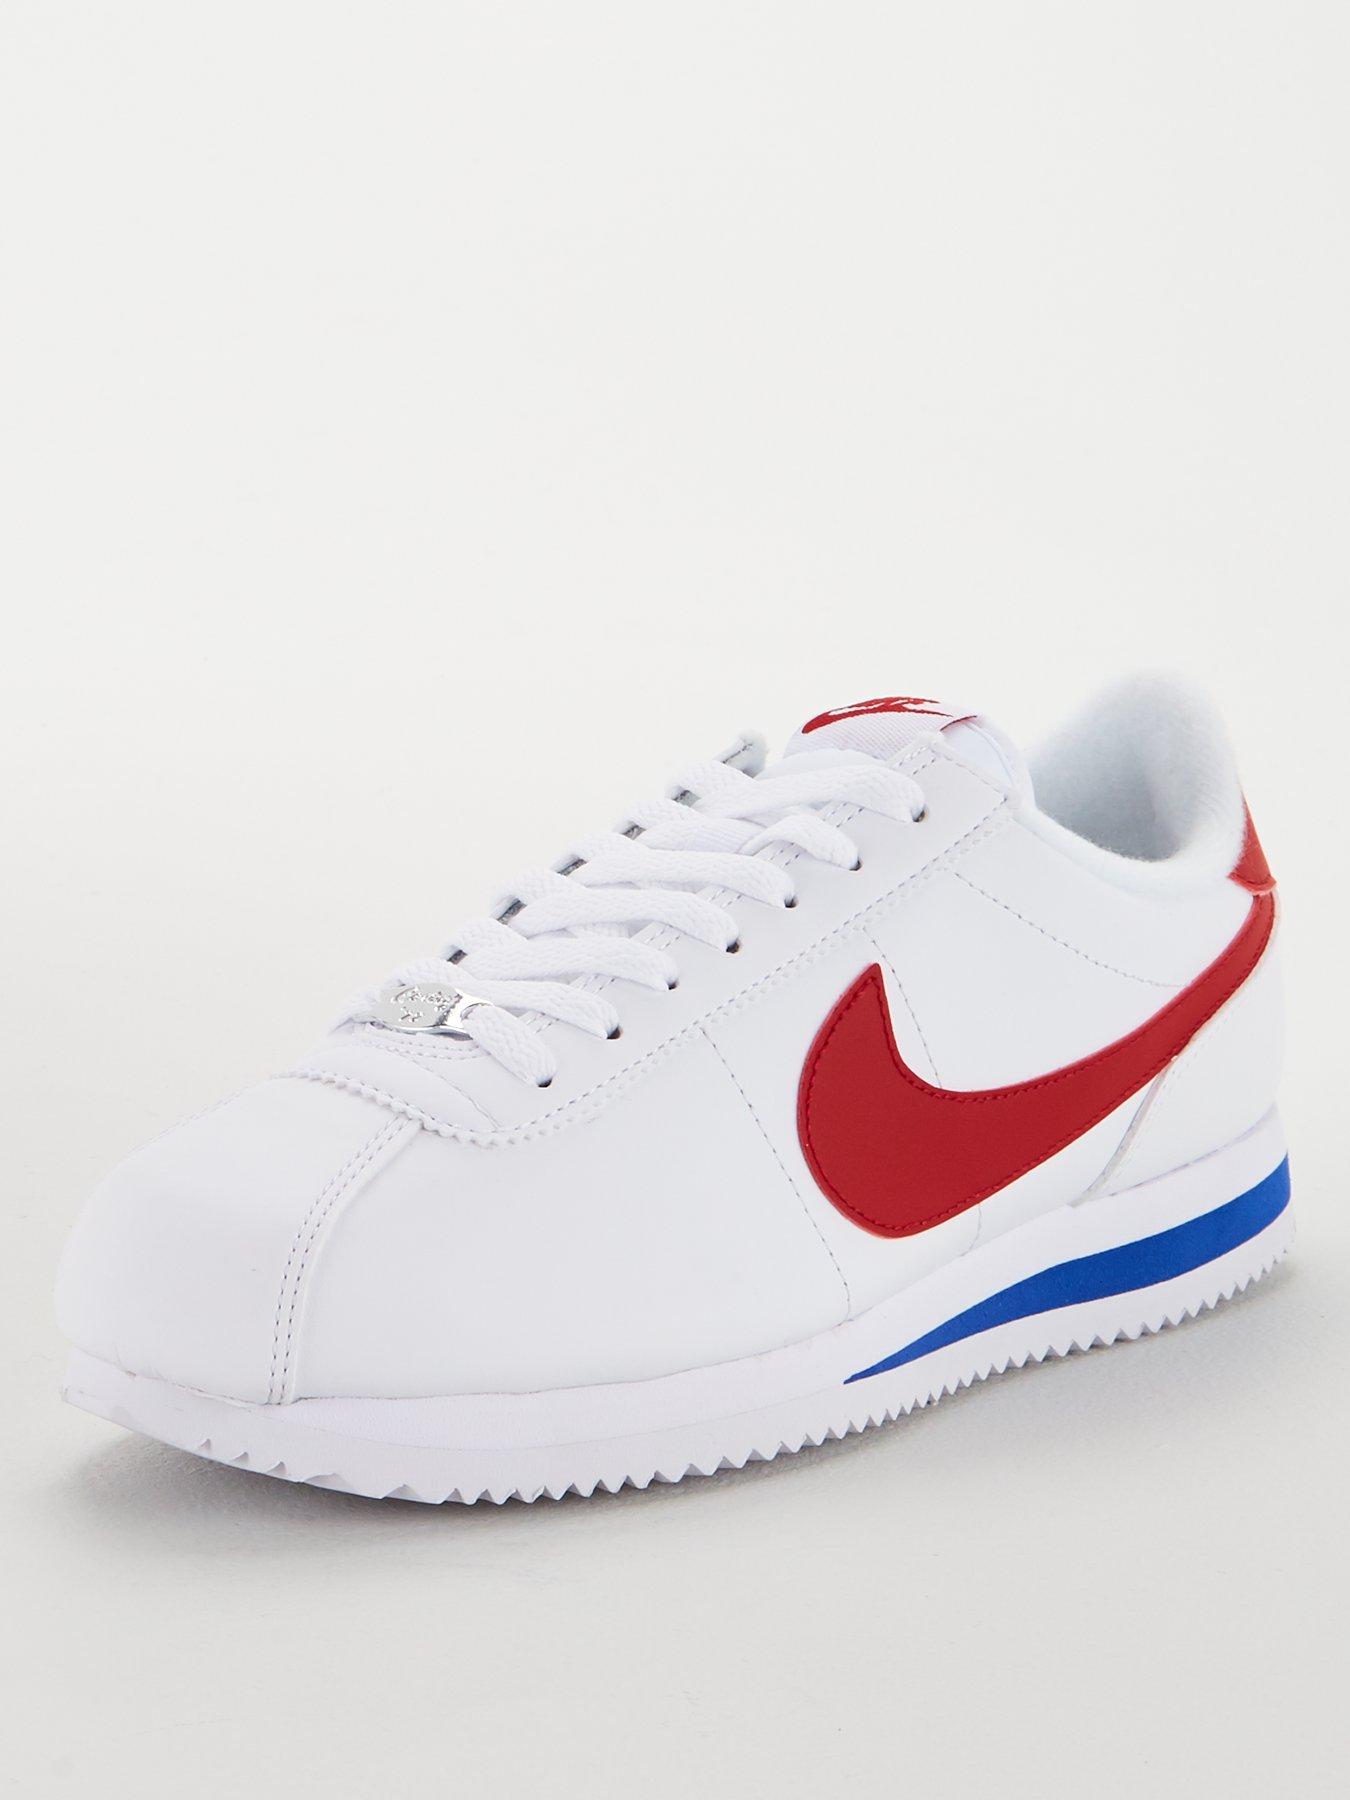 nike cortez red and blue